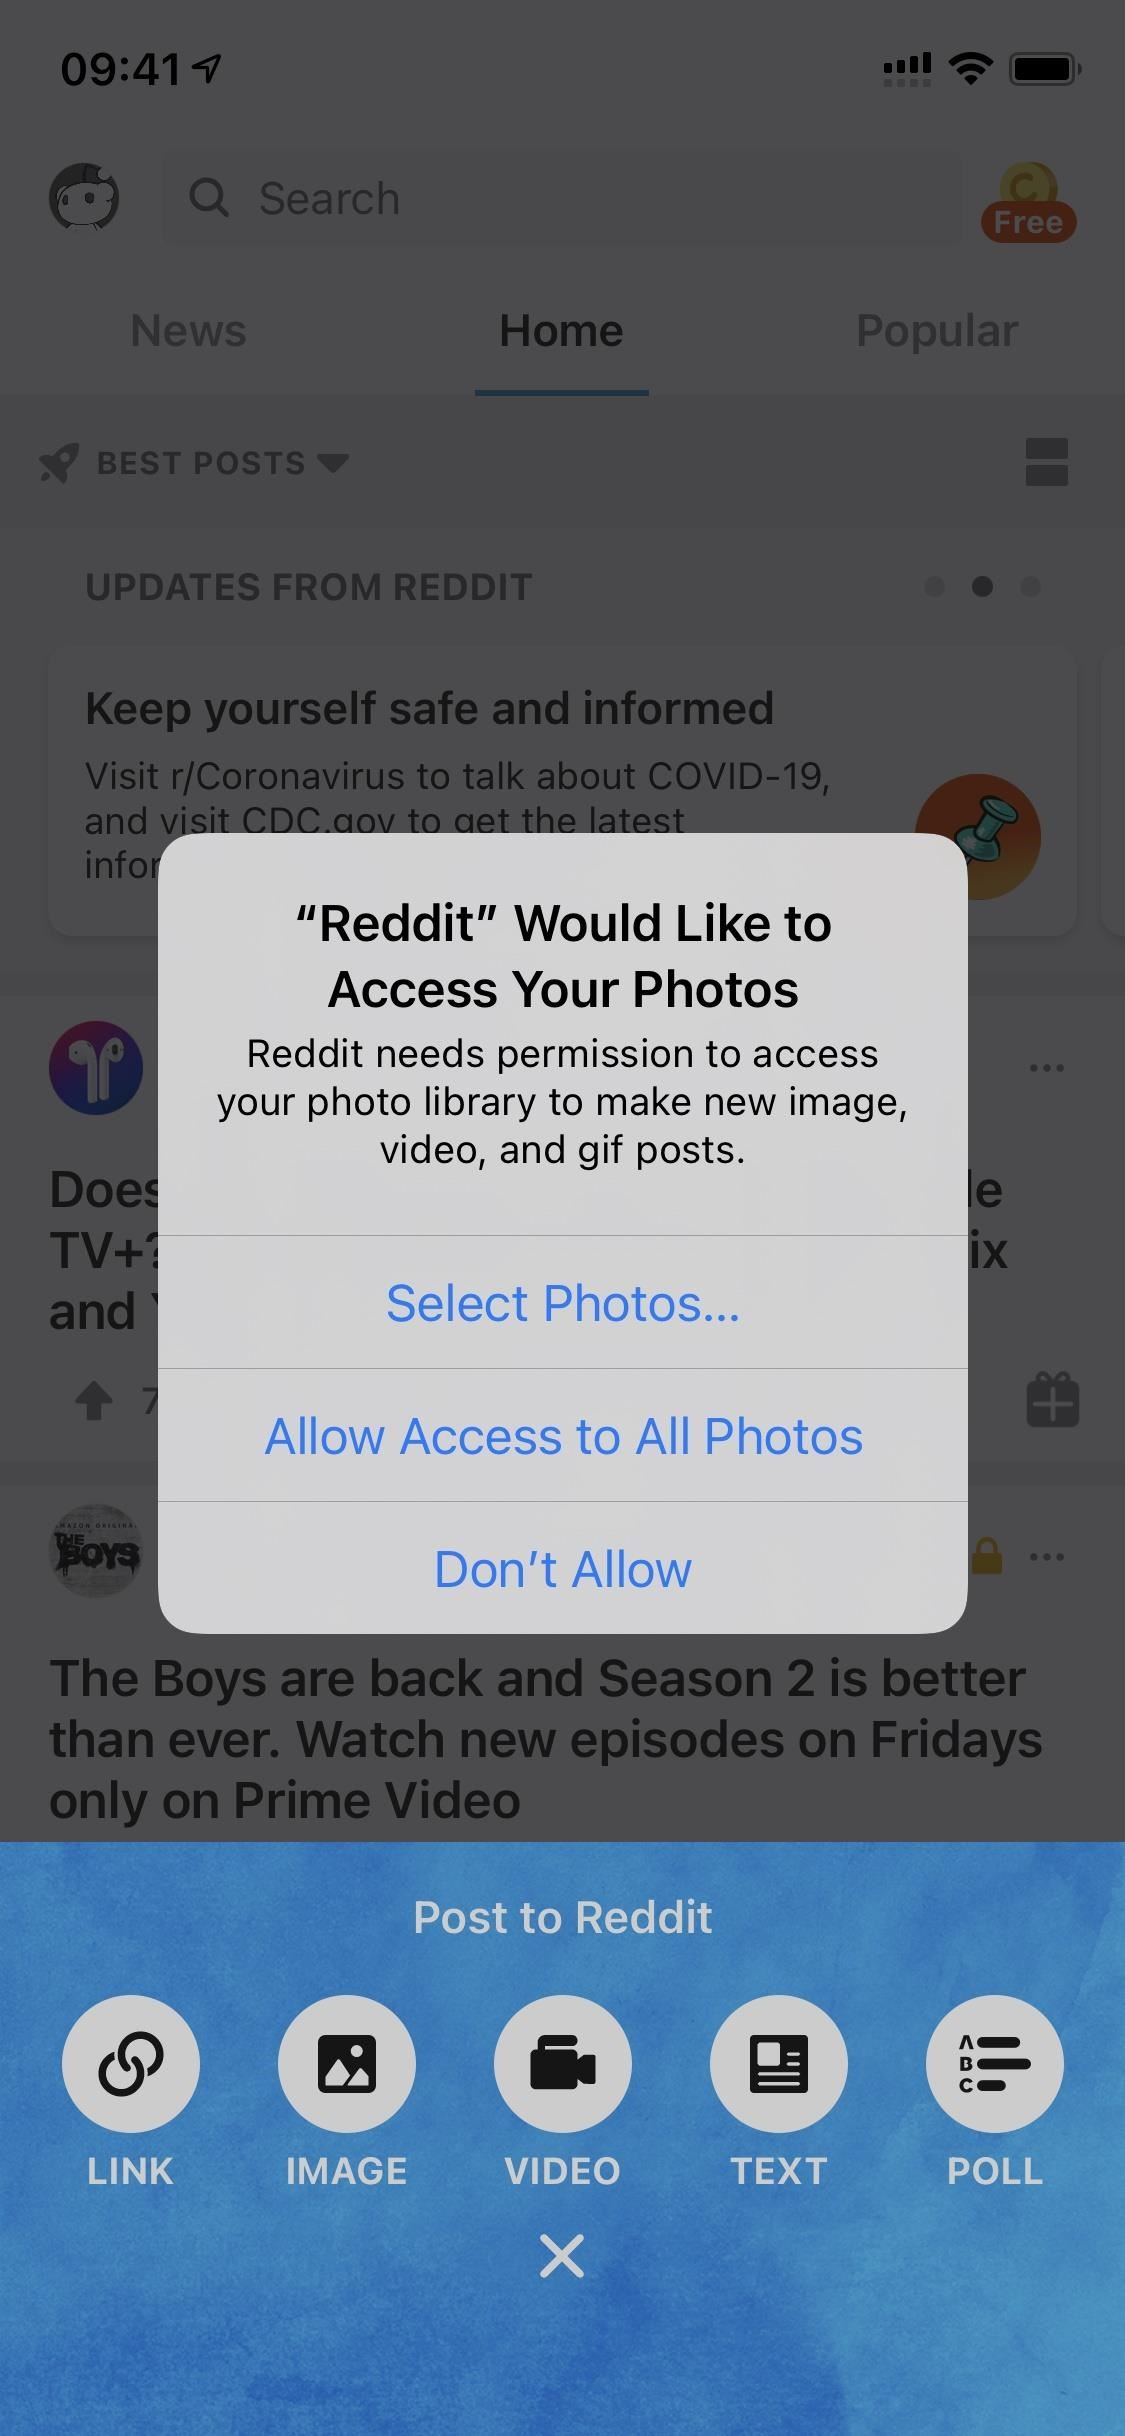 iOS 14's New Security Alerts Rat Out Apps for Privacy Invasions on Your iPhone & It'll Only Get Better